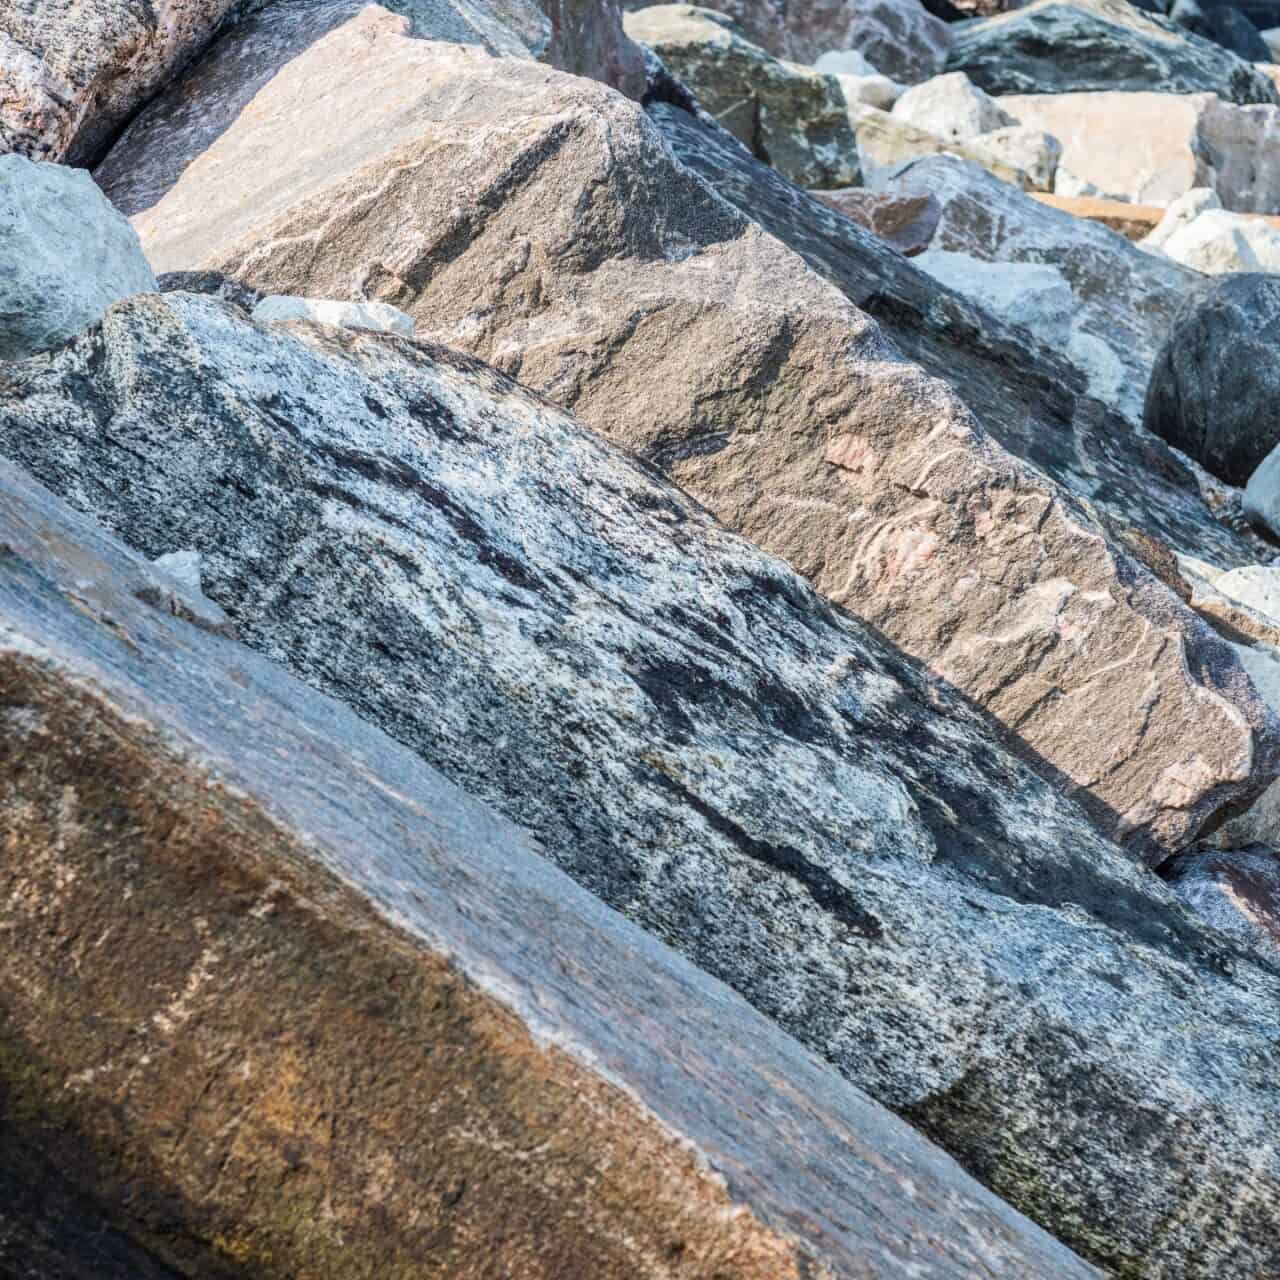 Large granite boulders protect against waves and ice on georgian bay.